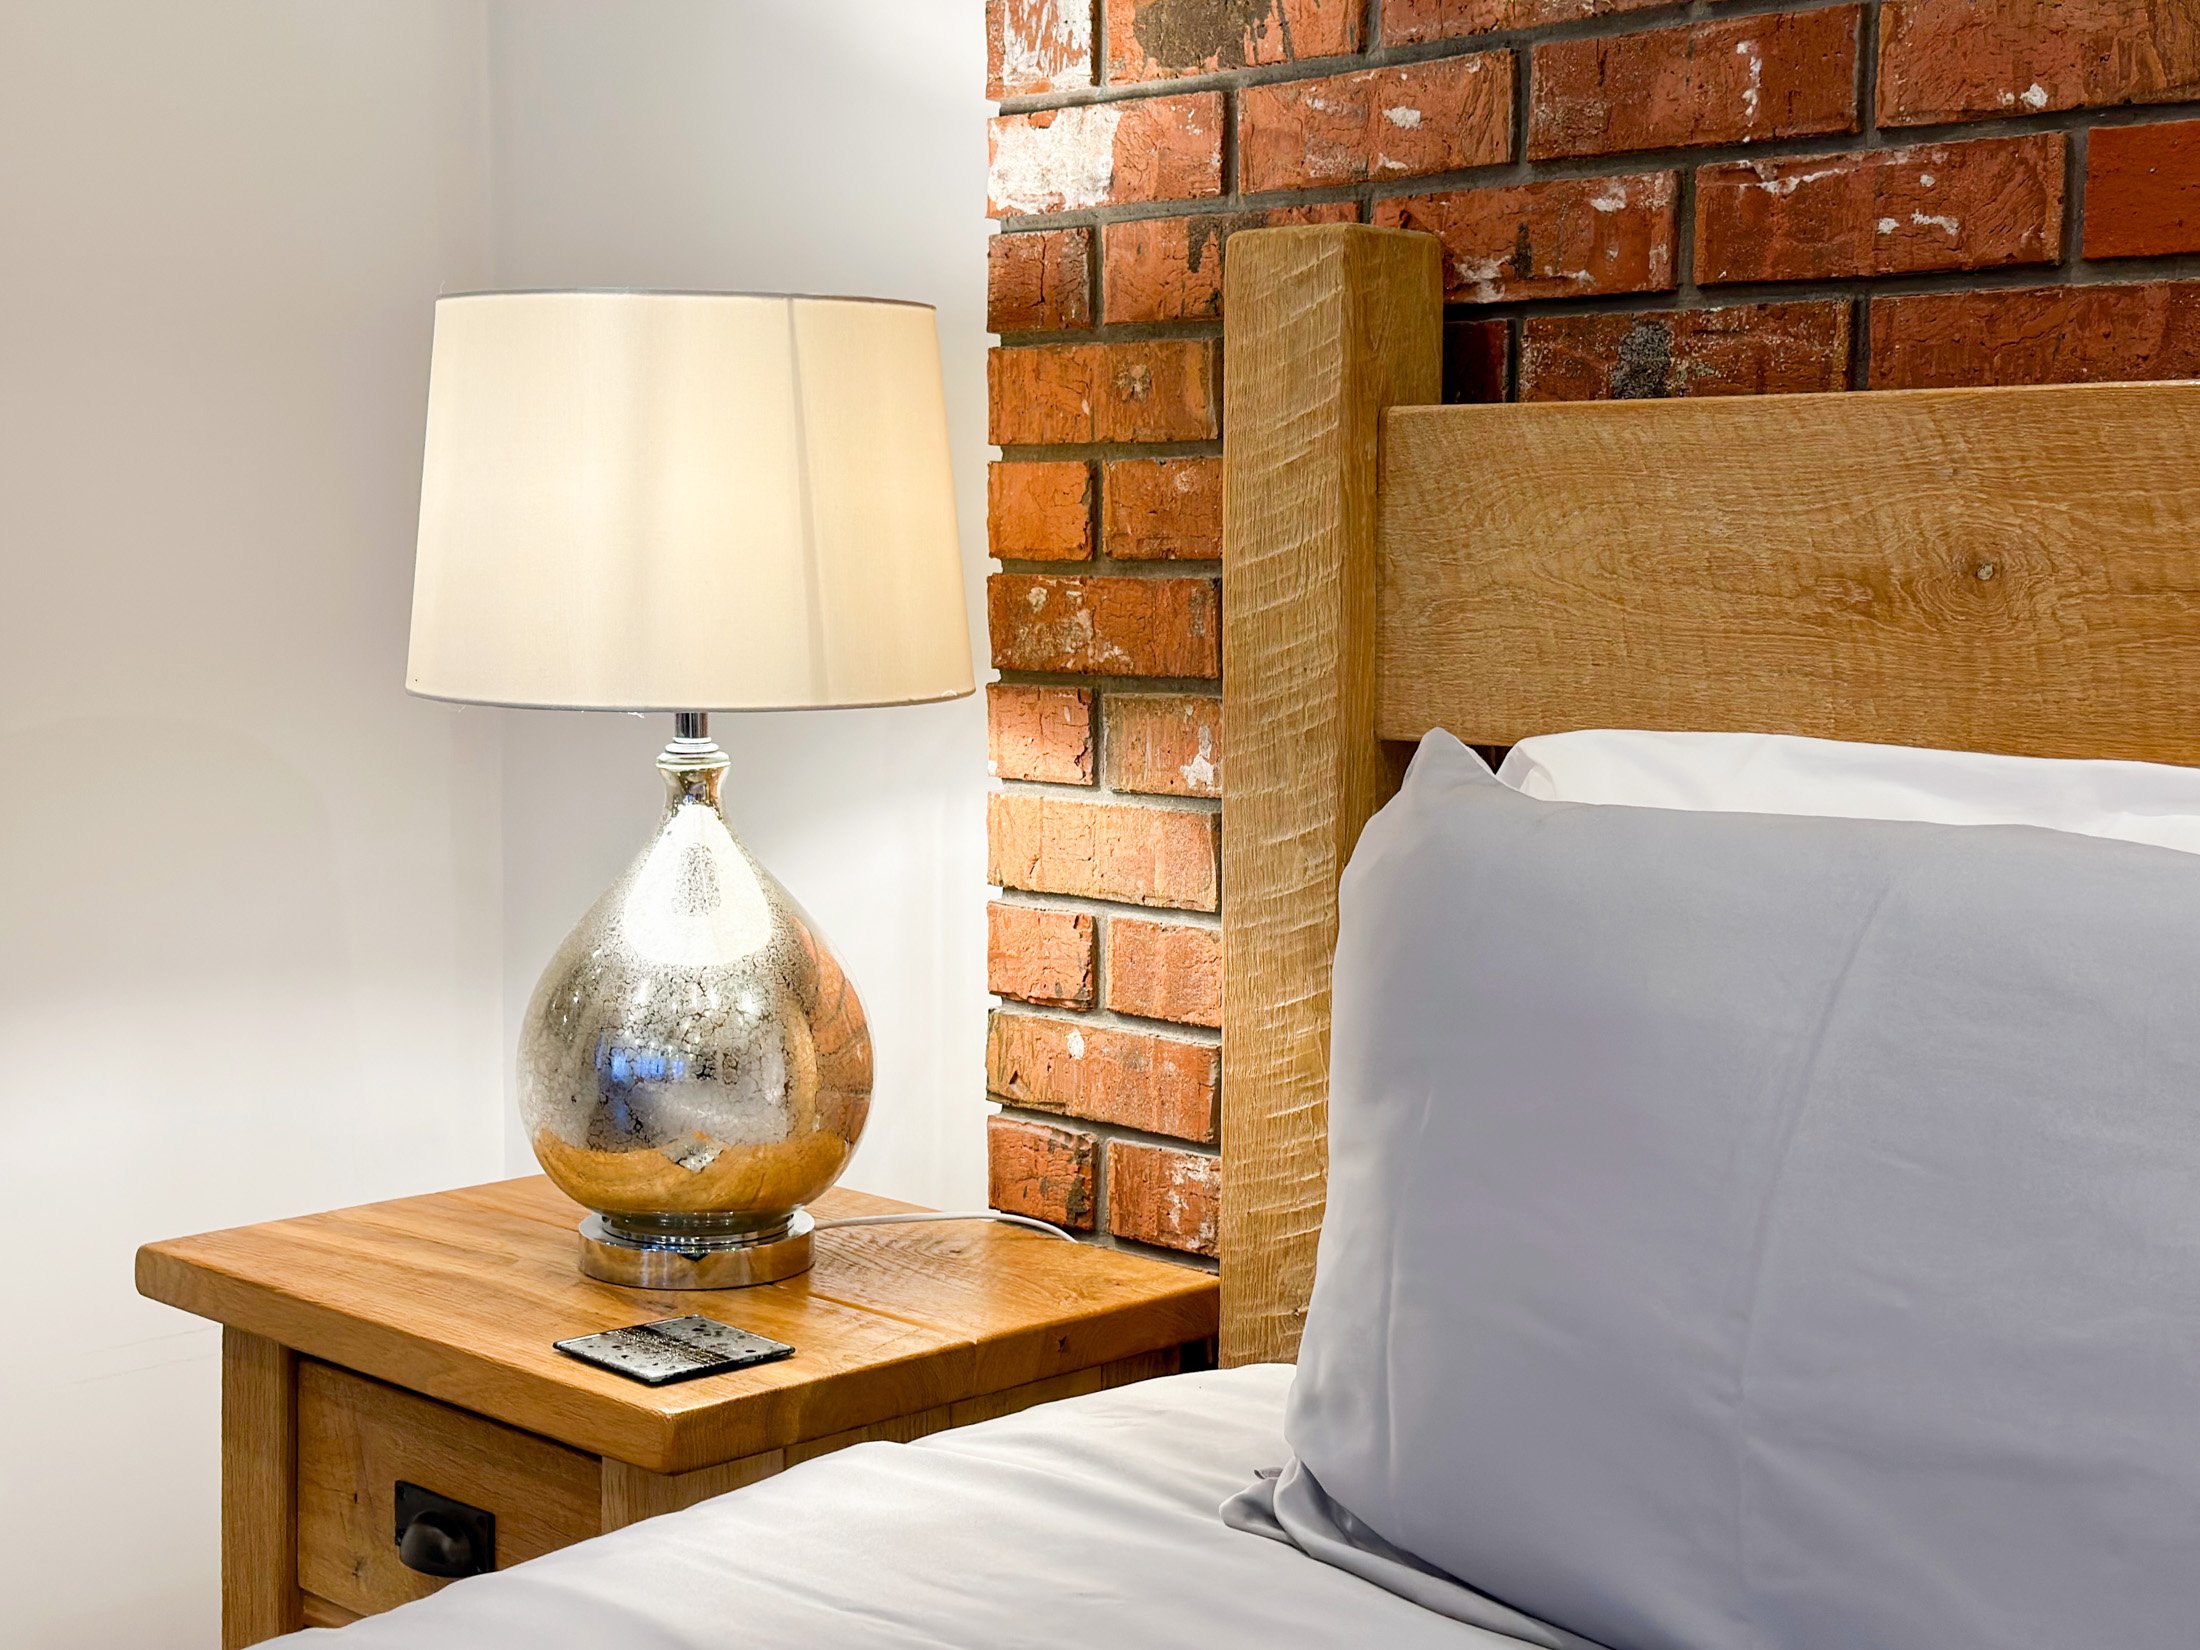 Bedside table lamp in Shooting Star